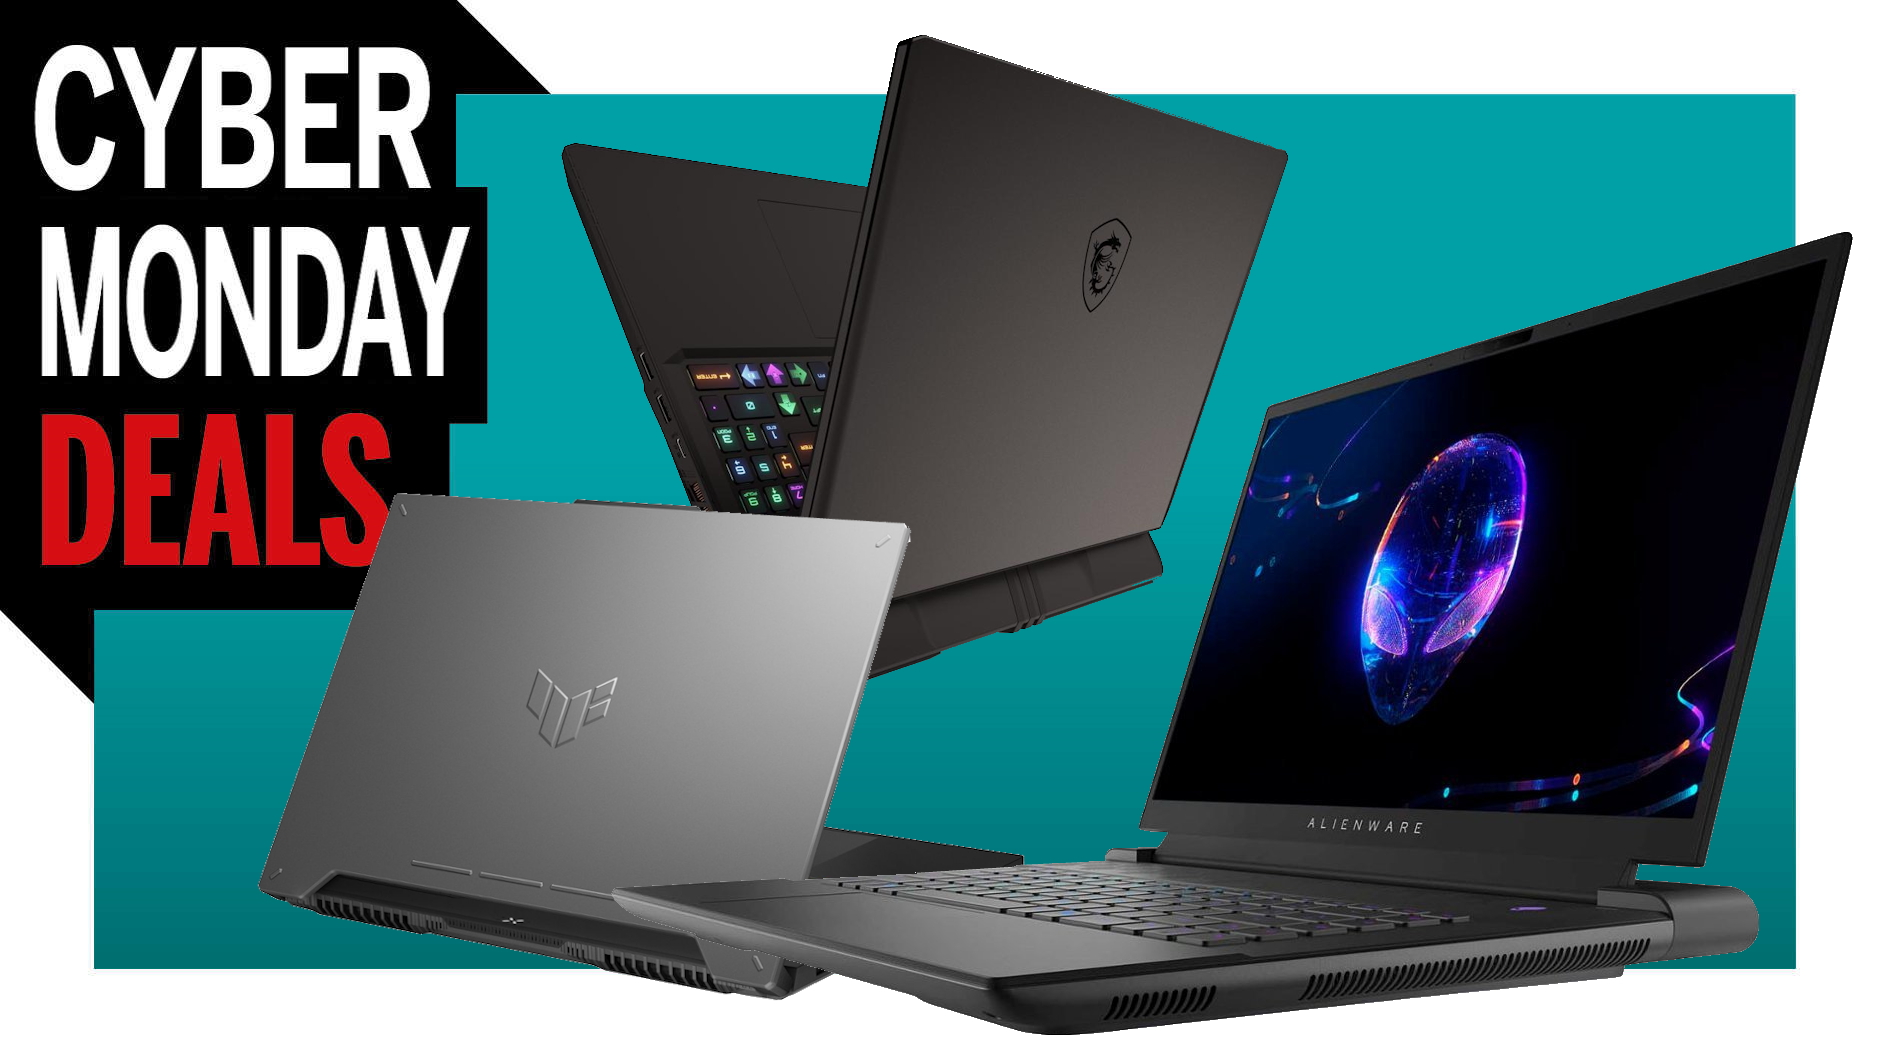 13 of the best Cyber Monday gaming laptop deals that are still live